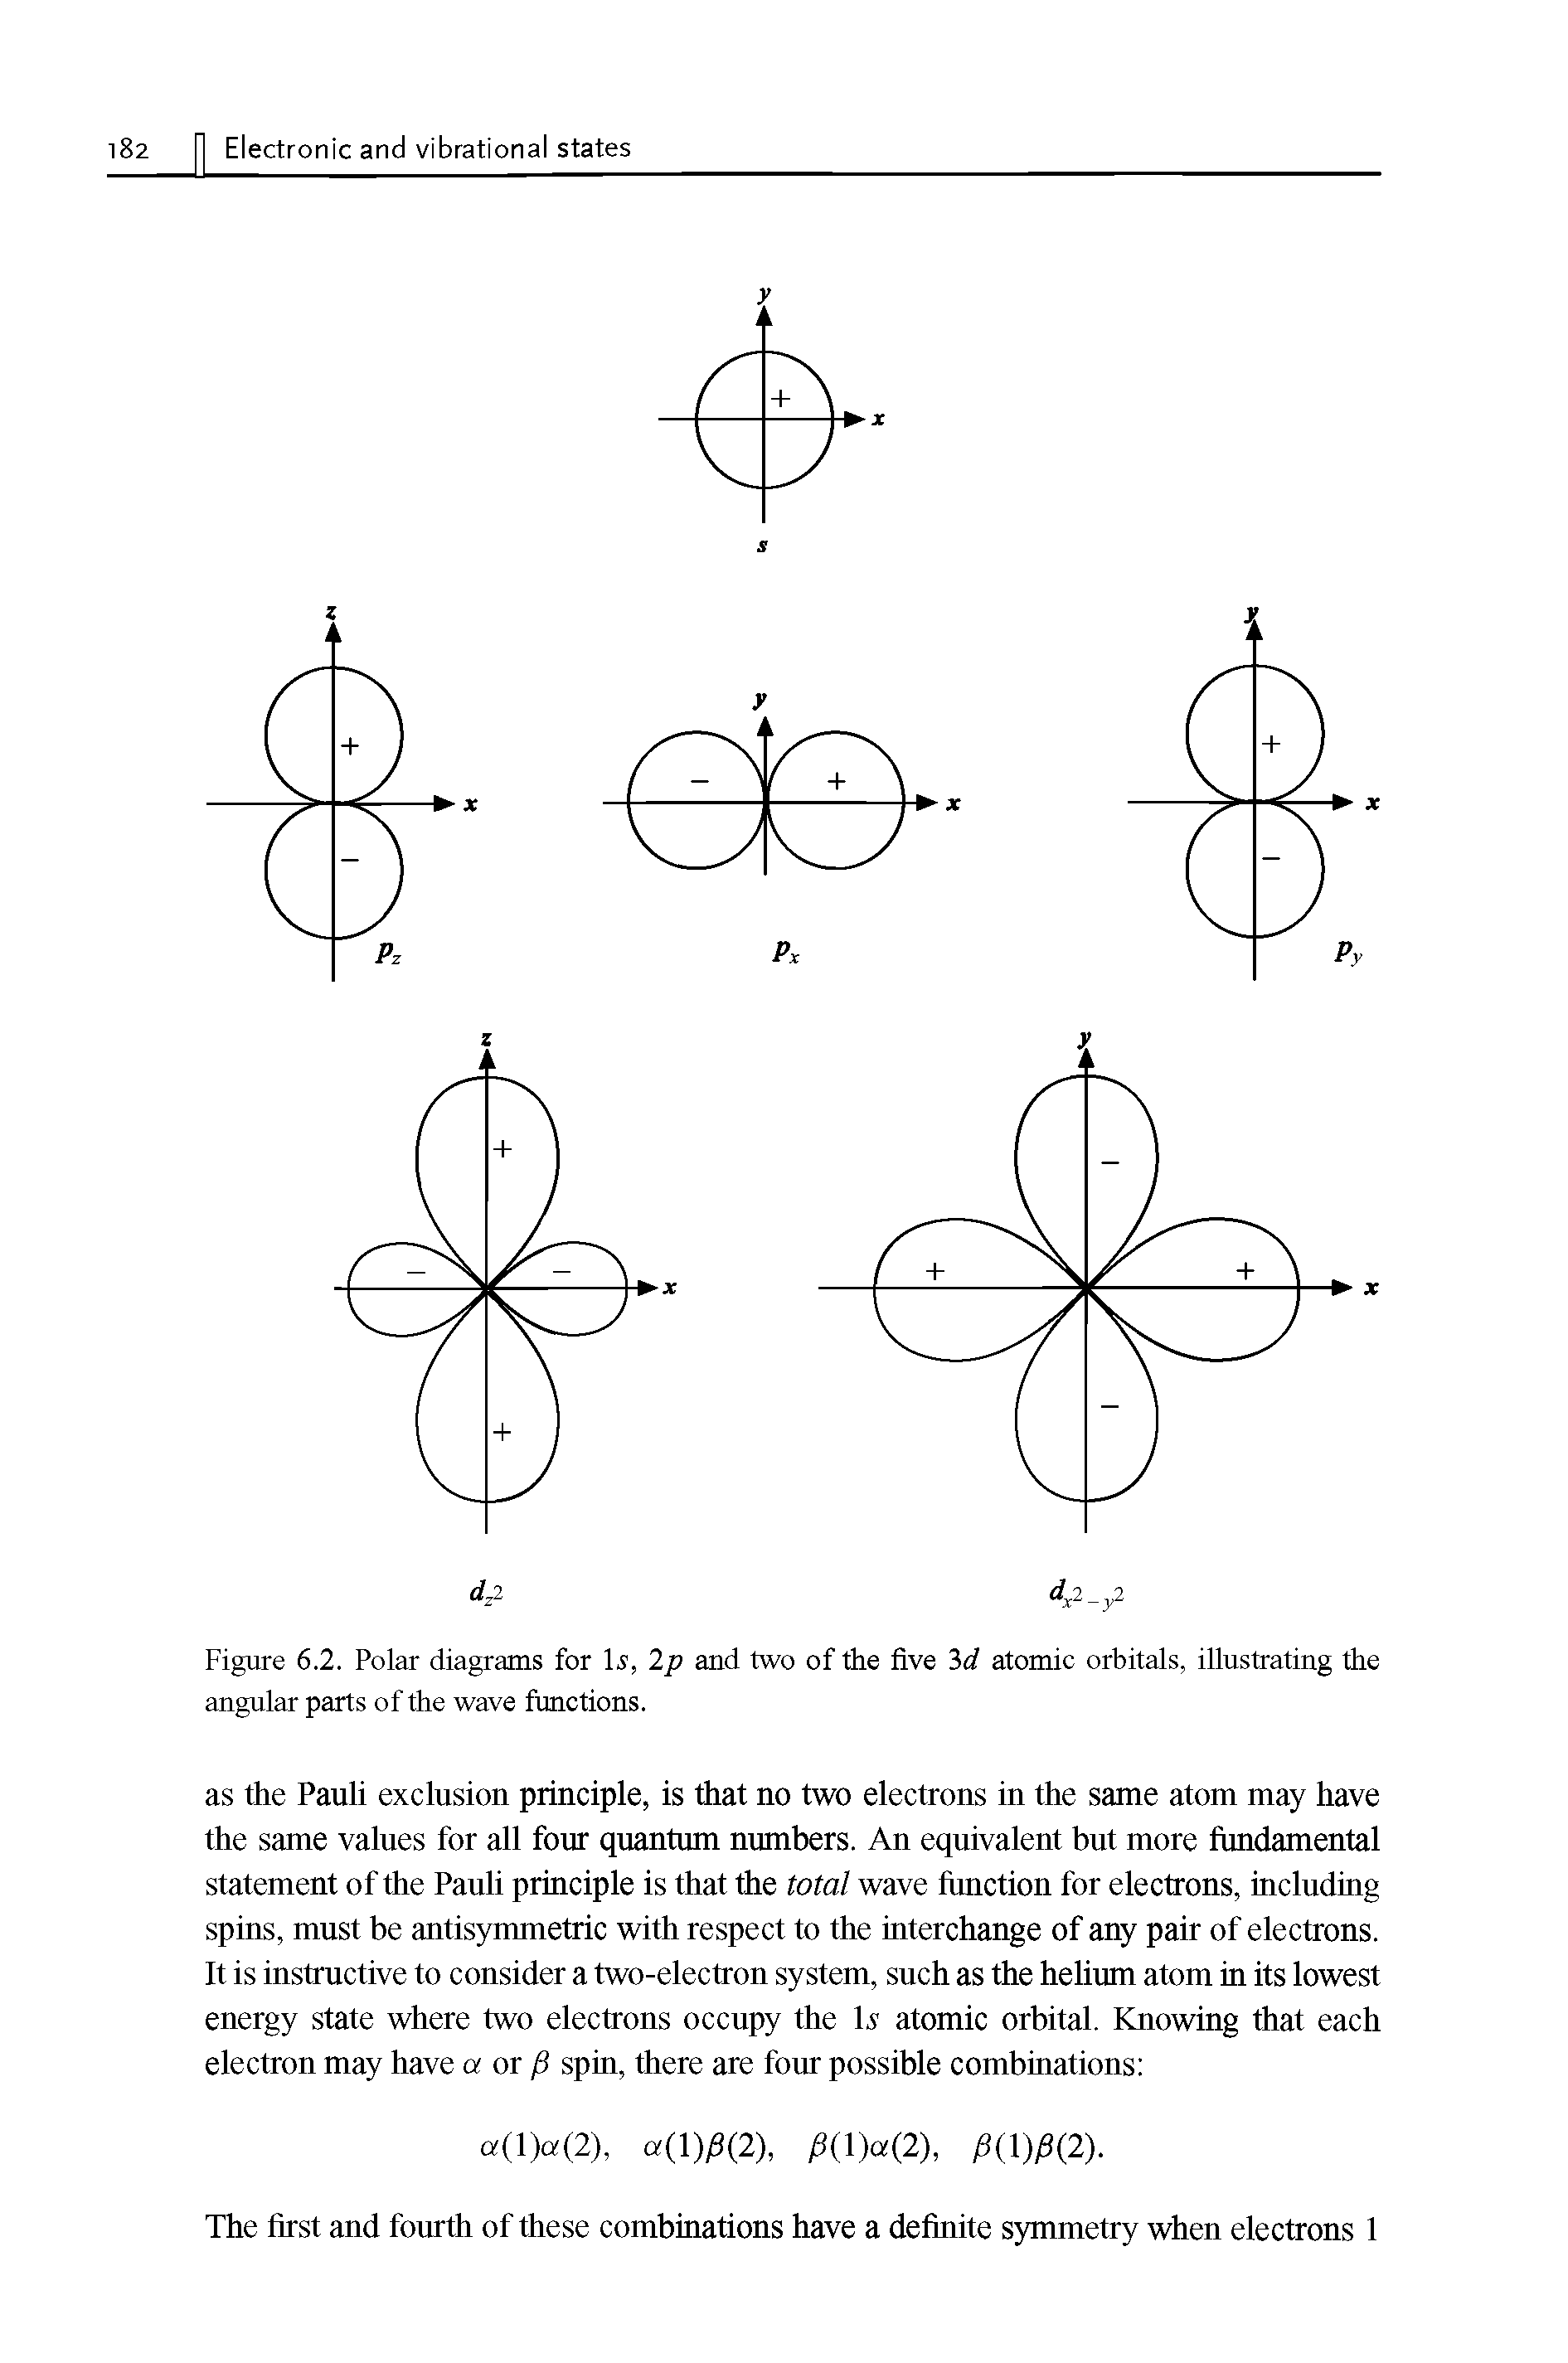 Figure 6.2. Polar diagrams for Is, 2p and two of the five 3d atomic orbitals, illustrating the angular parts of the wave functions.